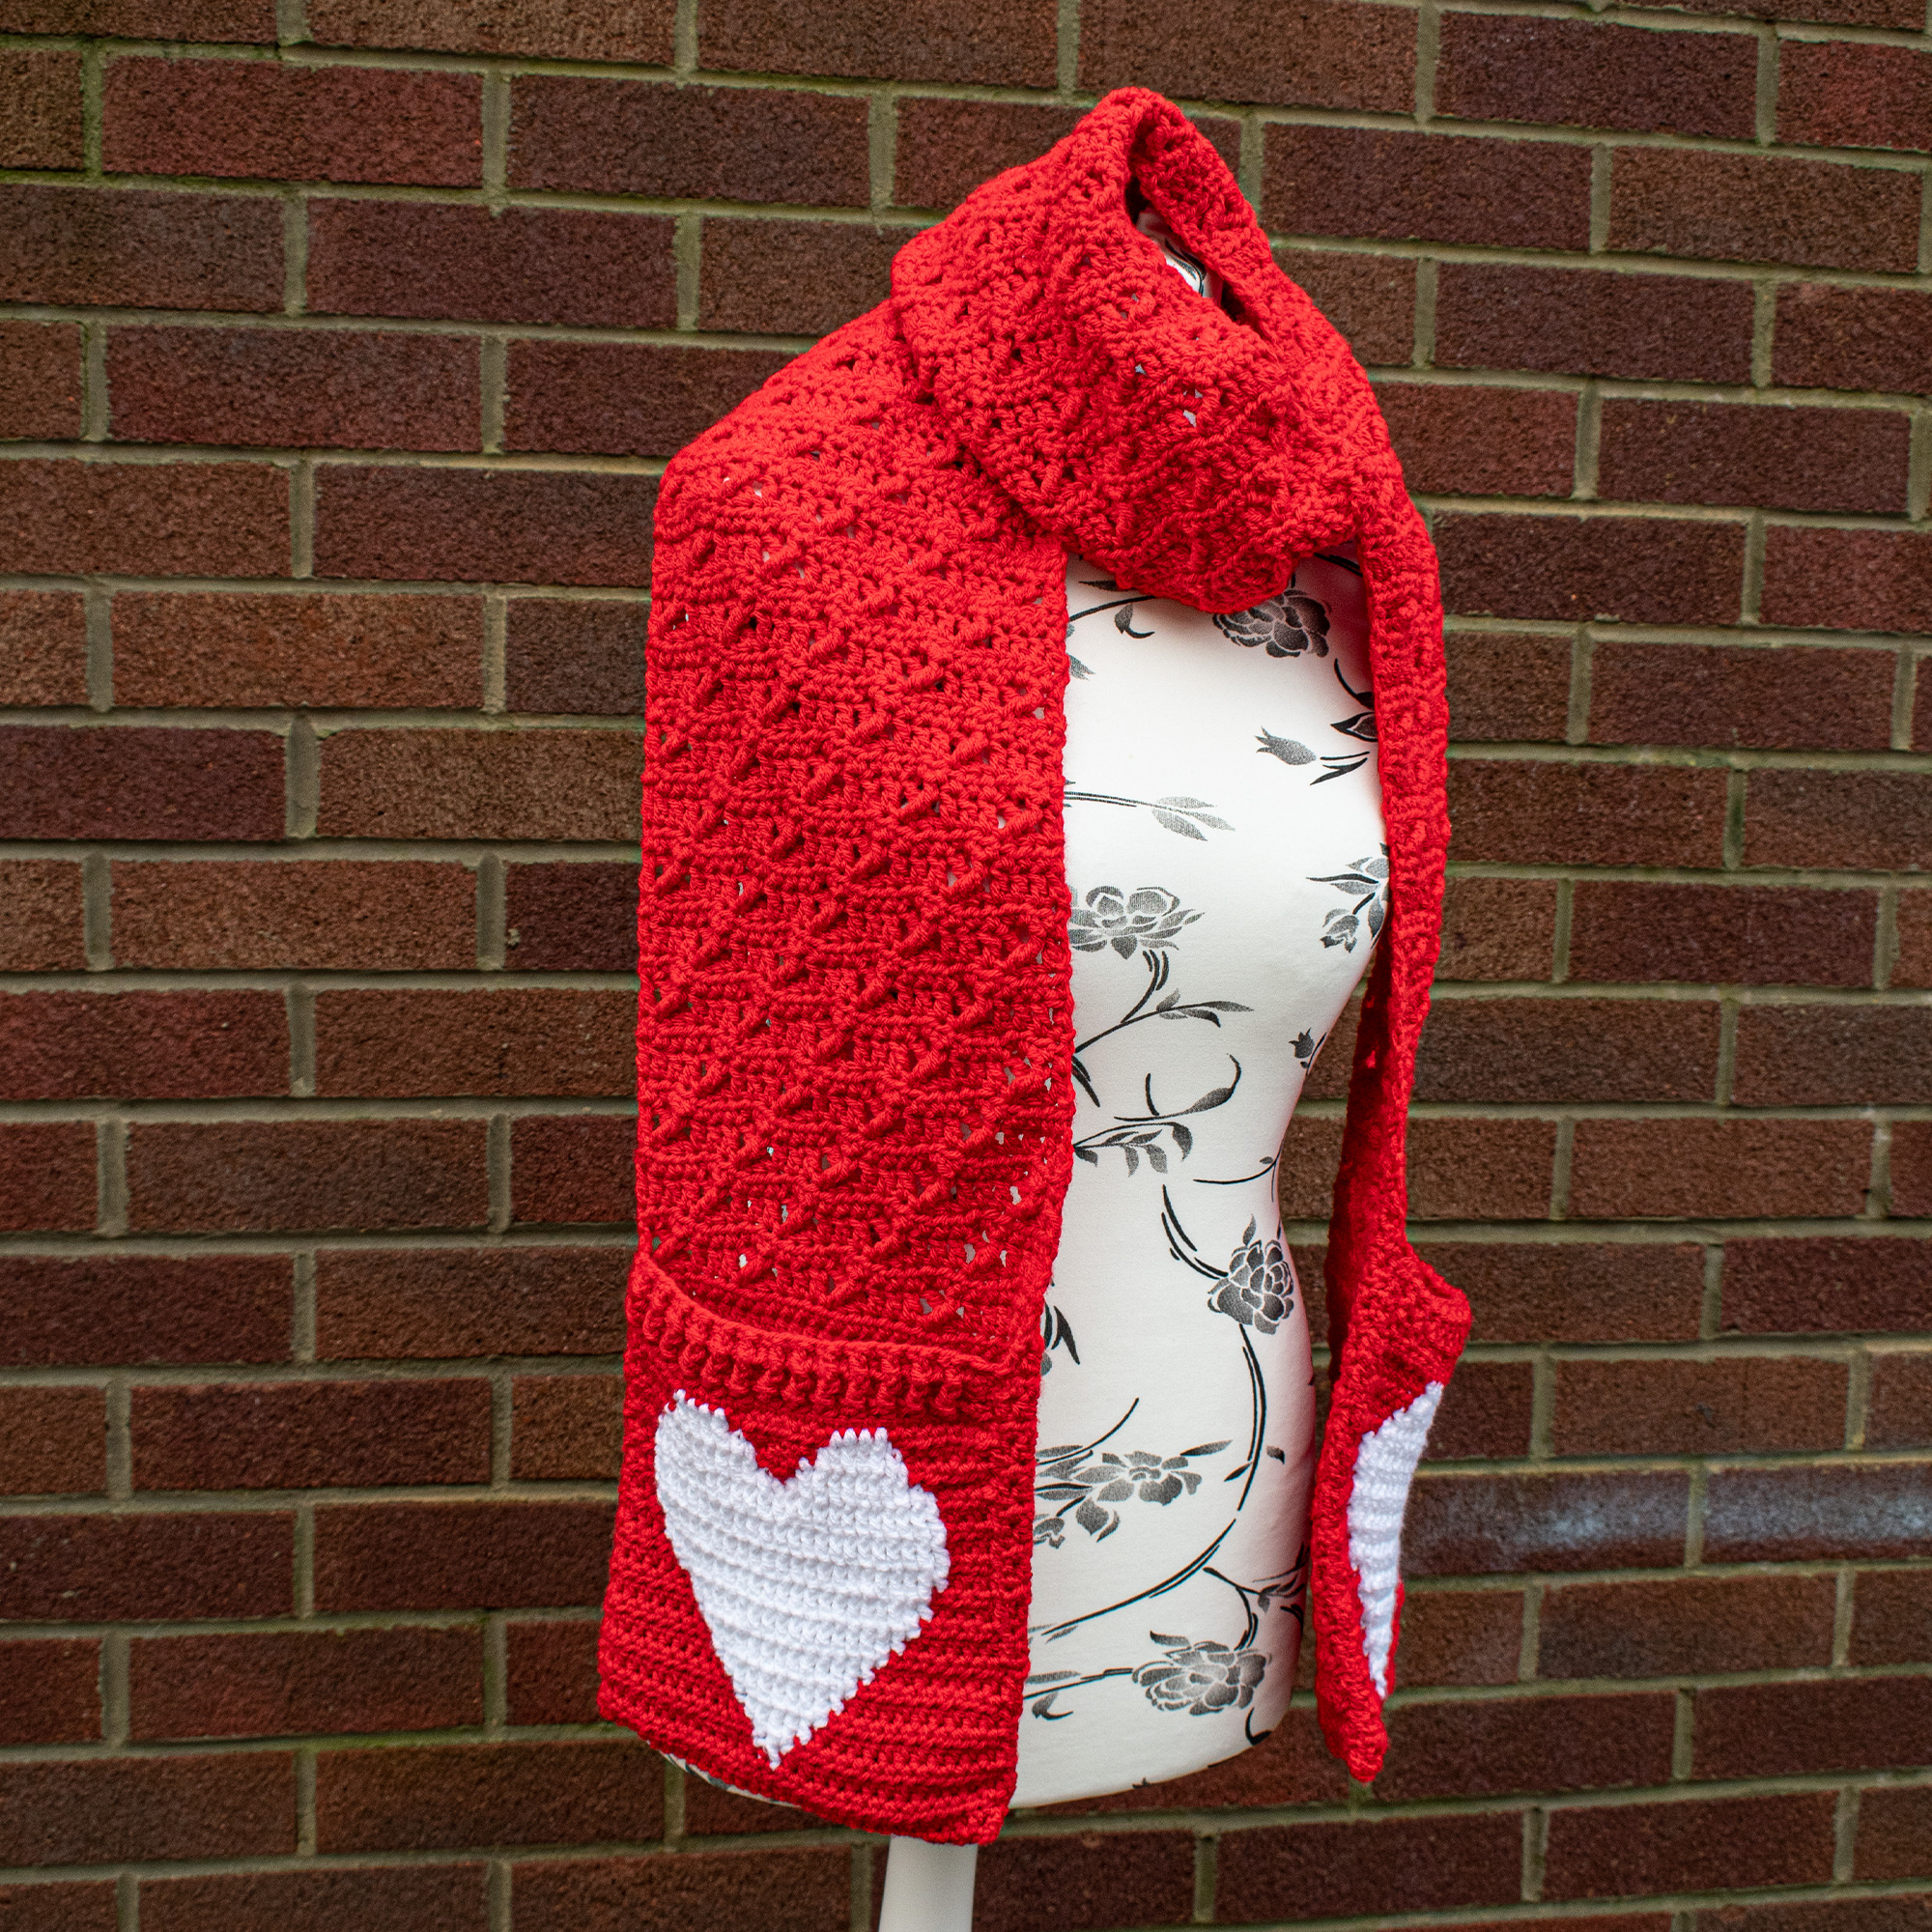 Adult pocket scarf is great for intermediate crocheters and looks stunning